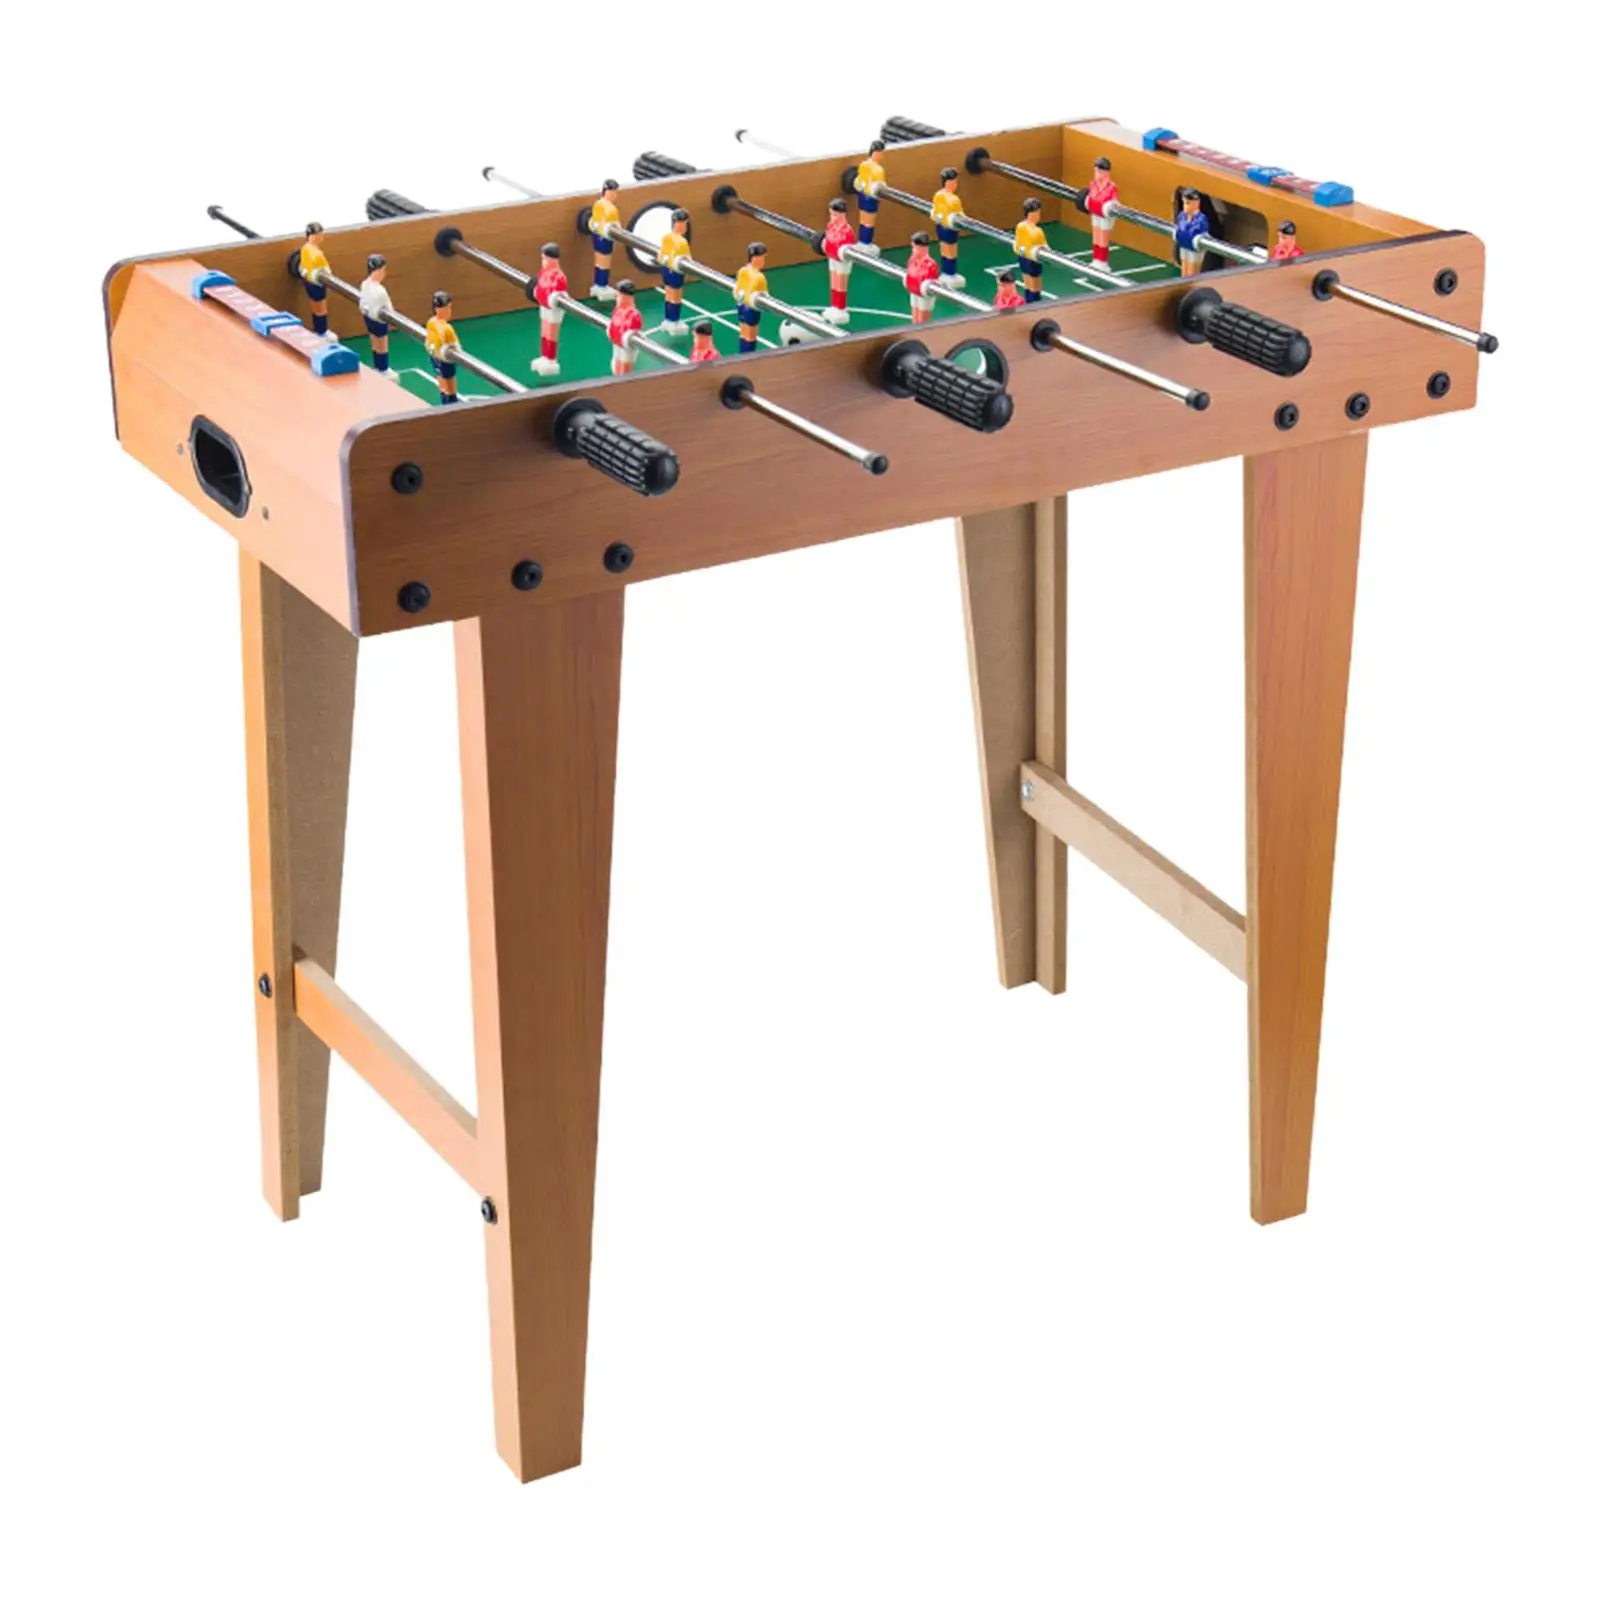 Wood Foosball Table Interactive Toy Tabletop Football Soccer Game Play Table Top Football Table for Outdoor Party